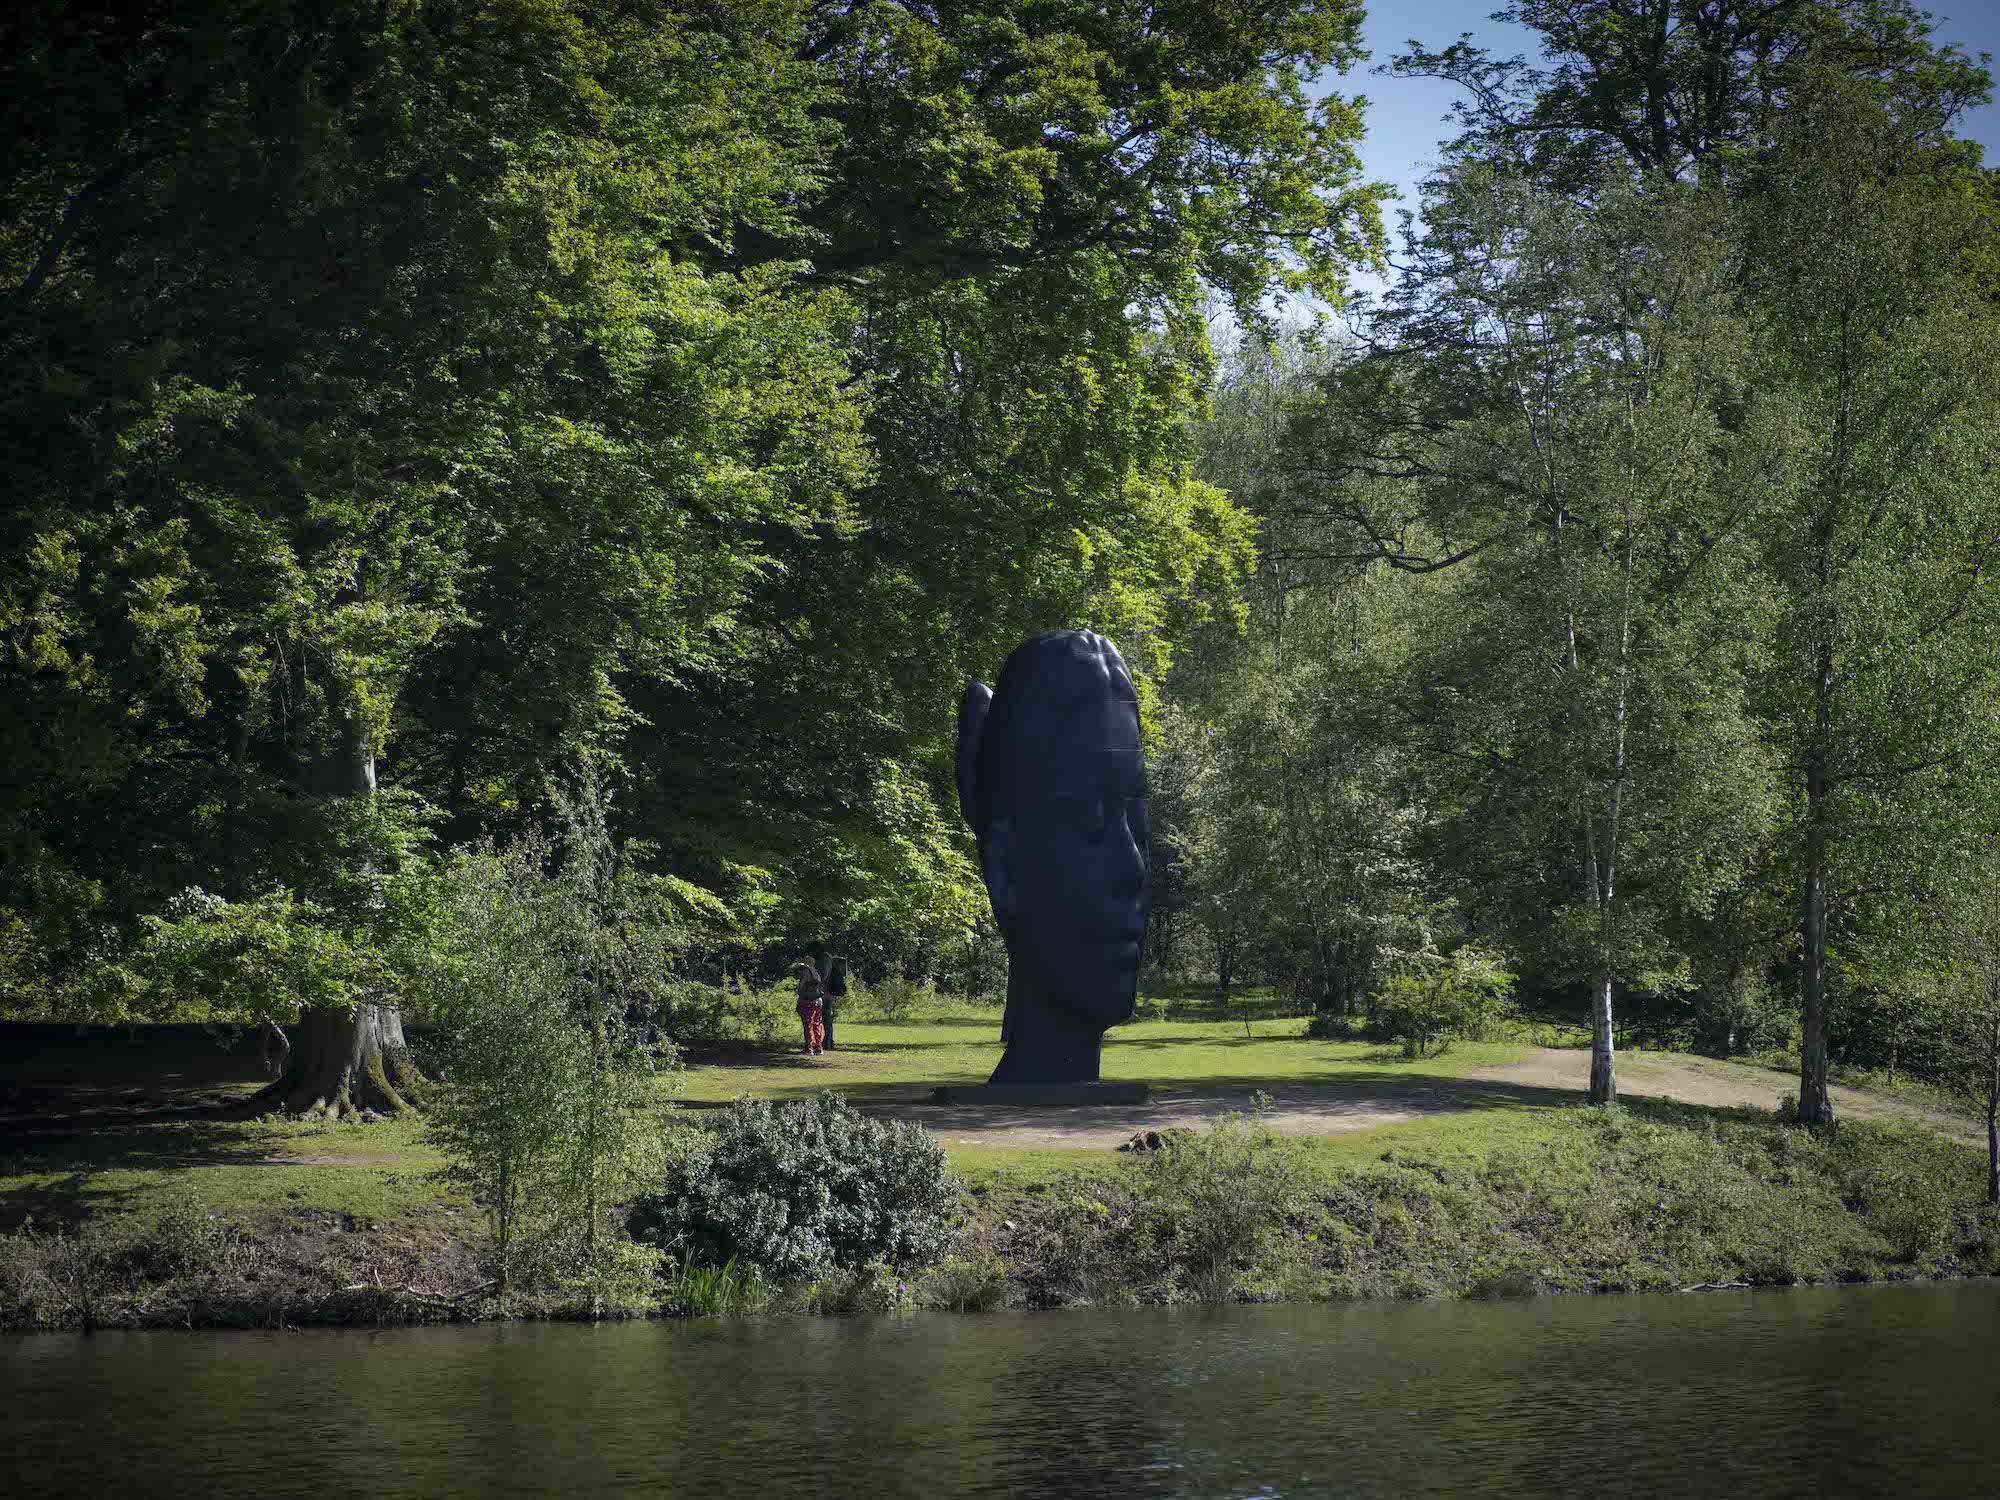 A sculpture of a girl's head flanked by trees, overlooking the lake.